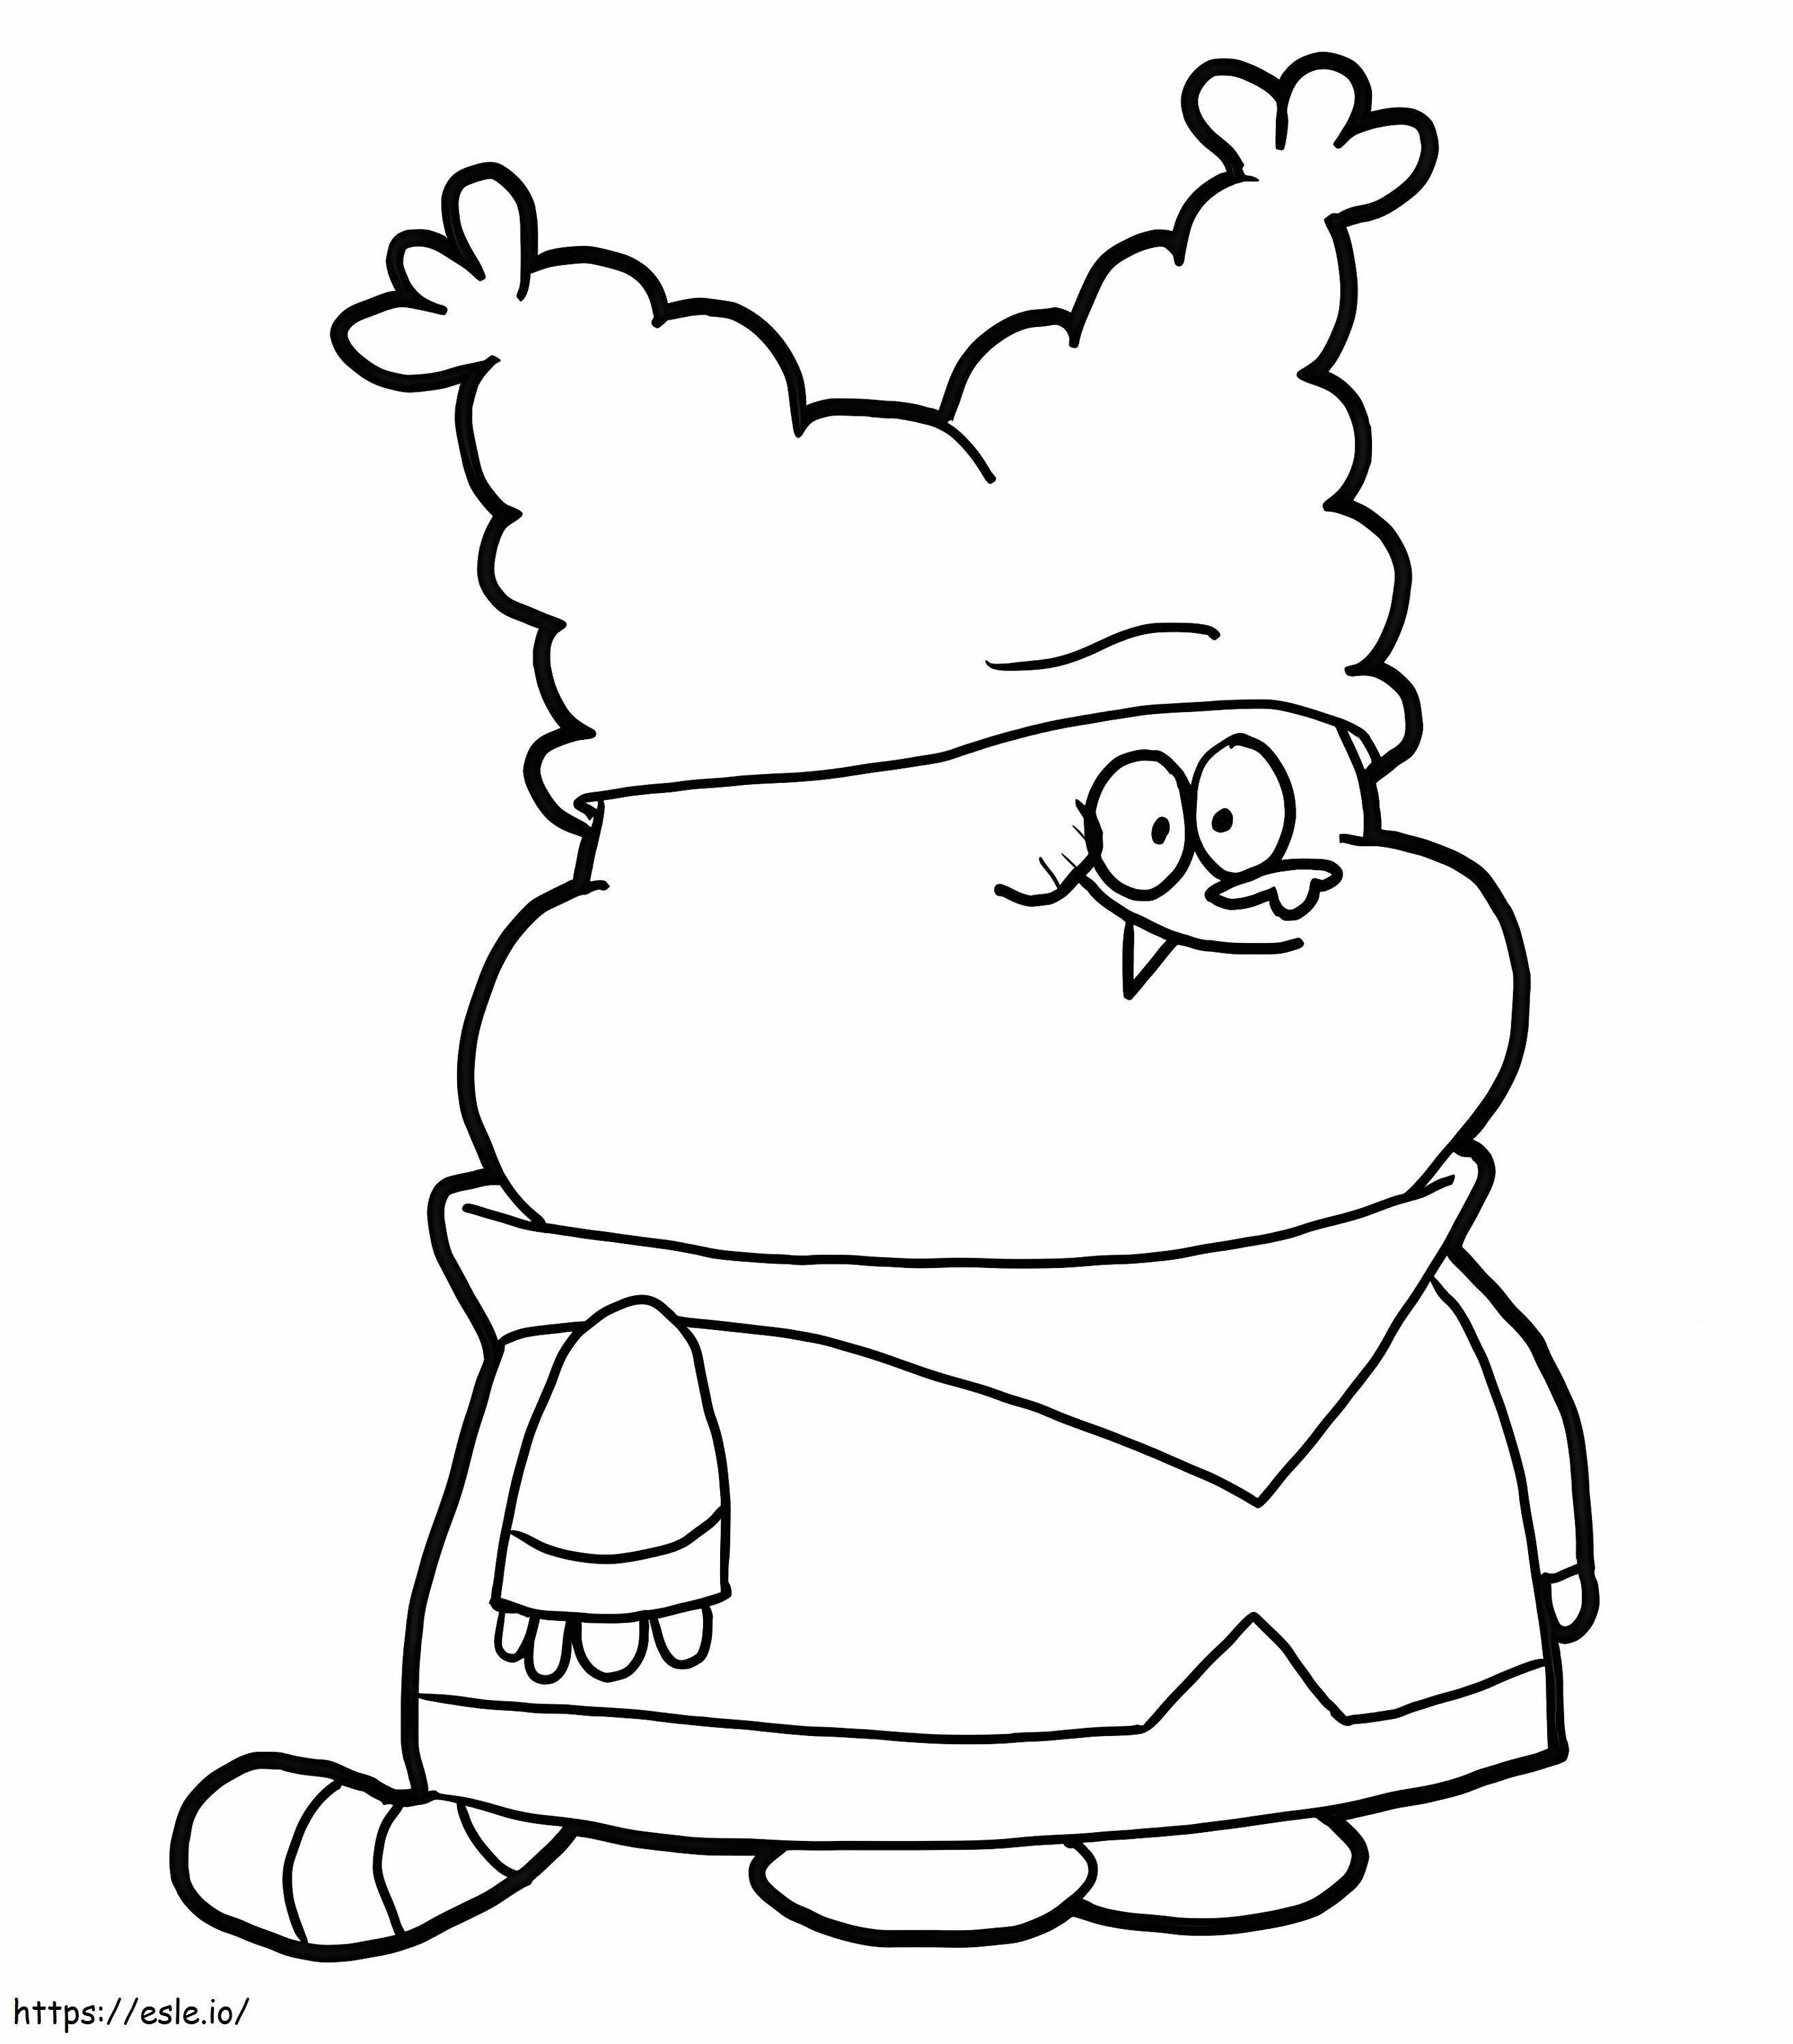 Happy Chowder coloring page